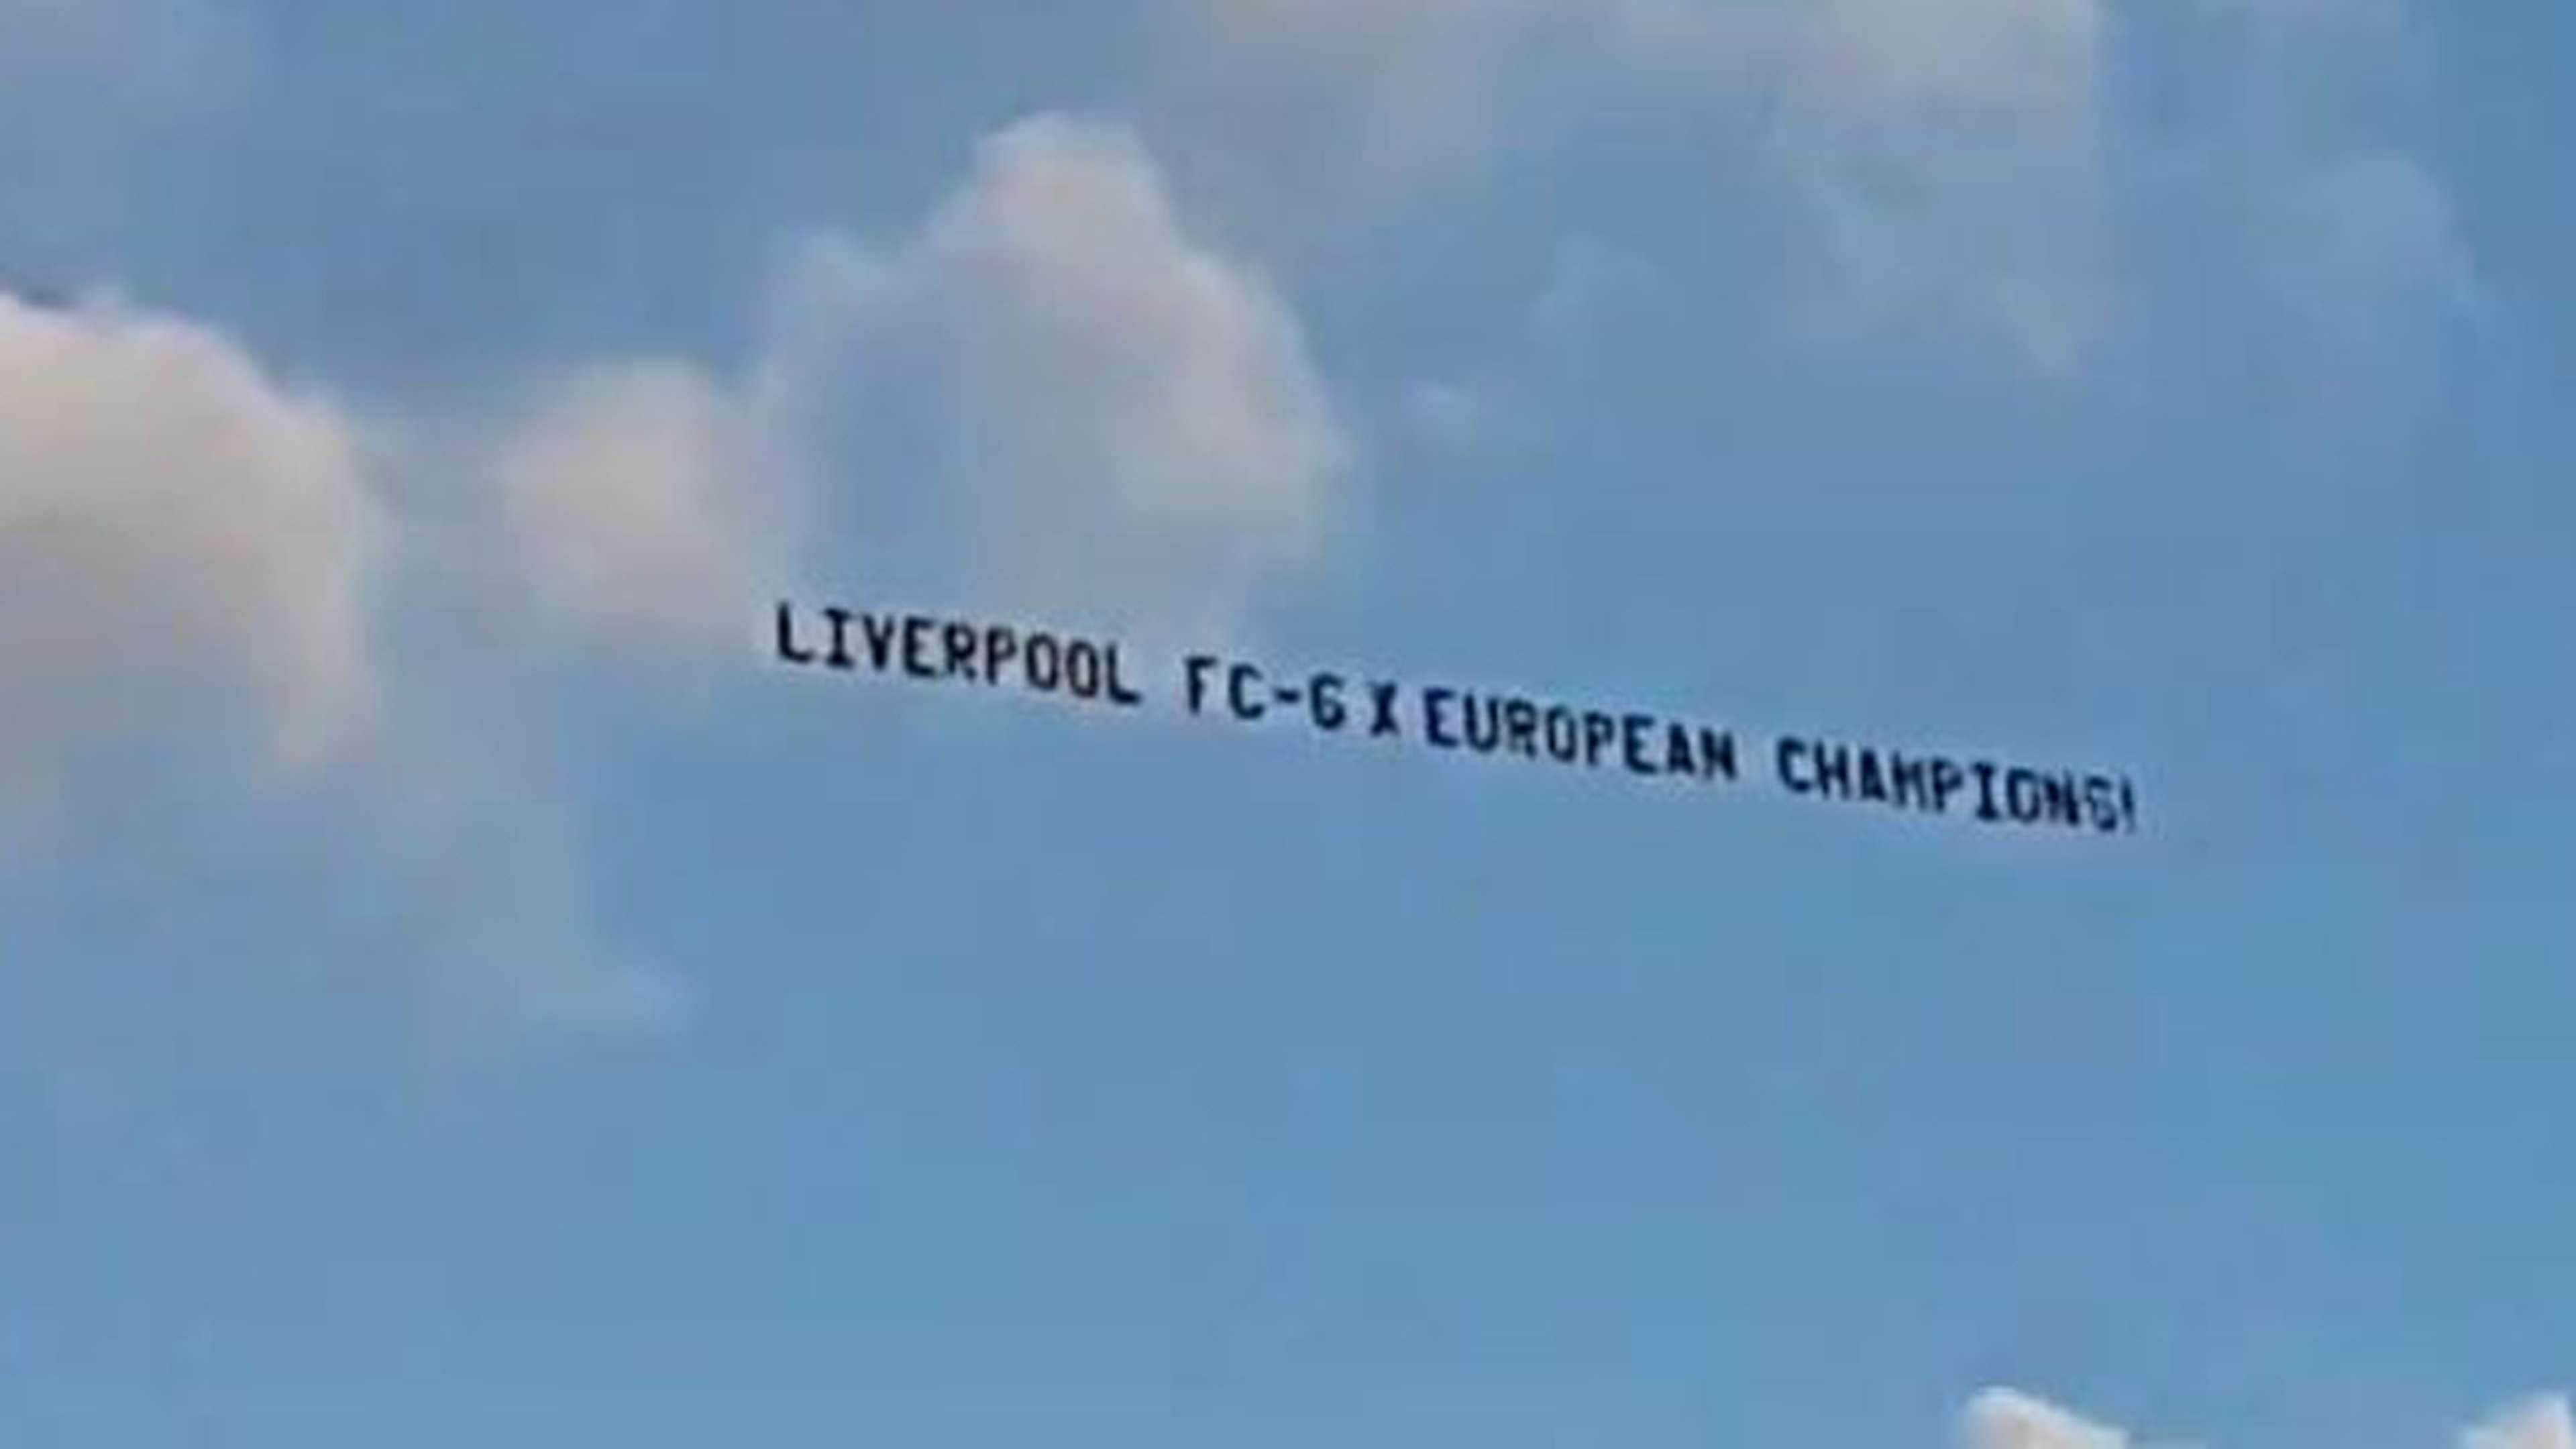 FC Liverpool fans airplane message